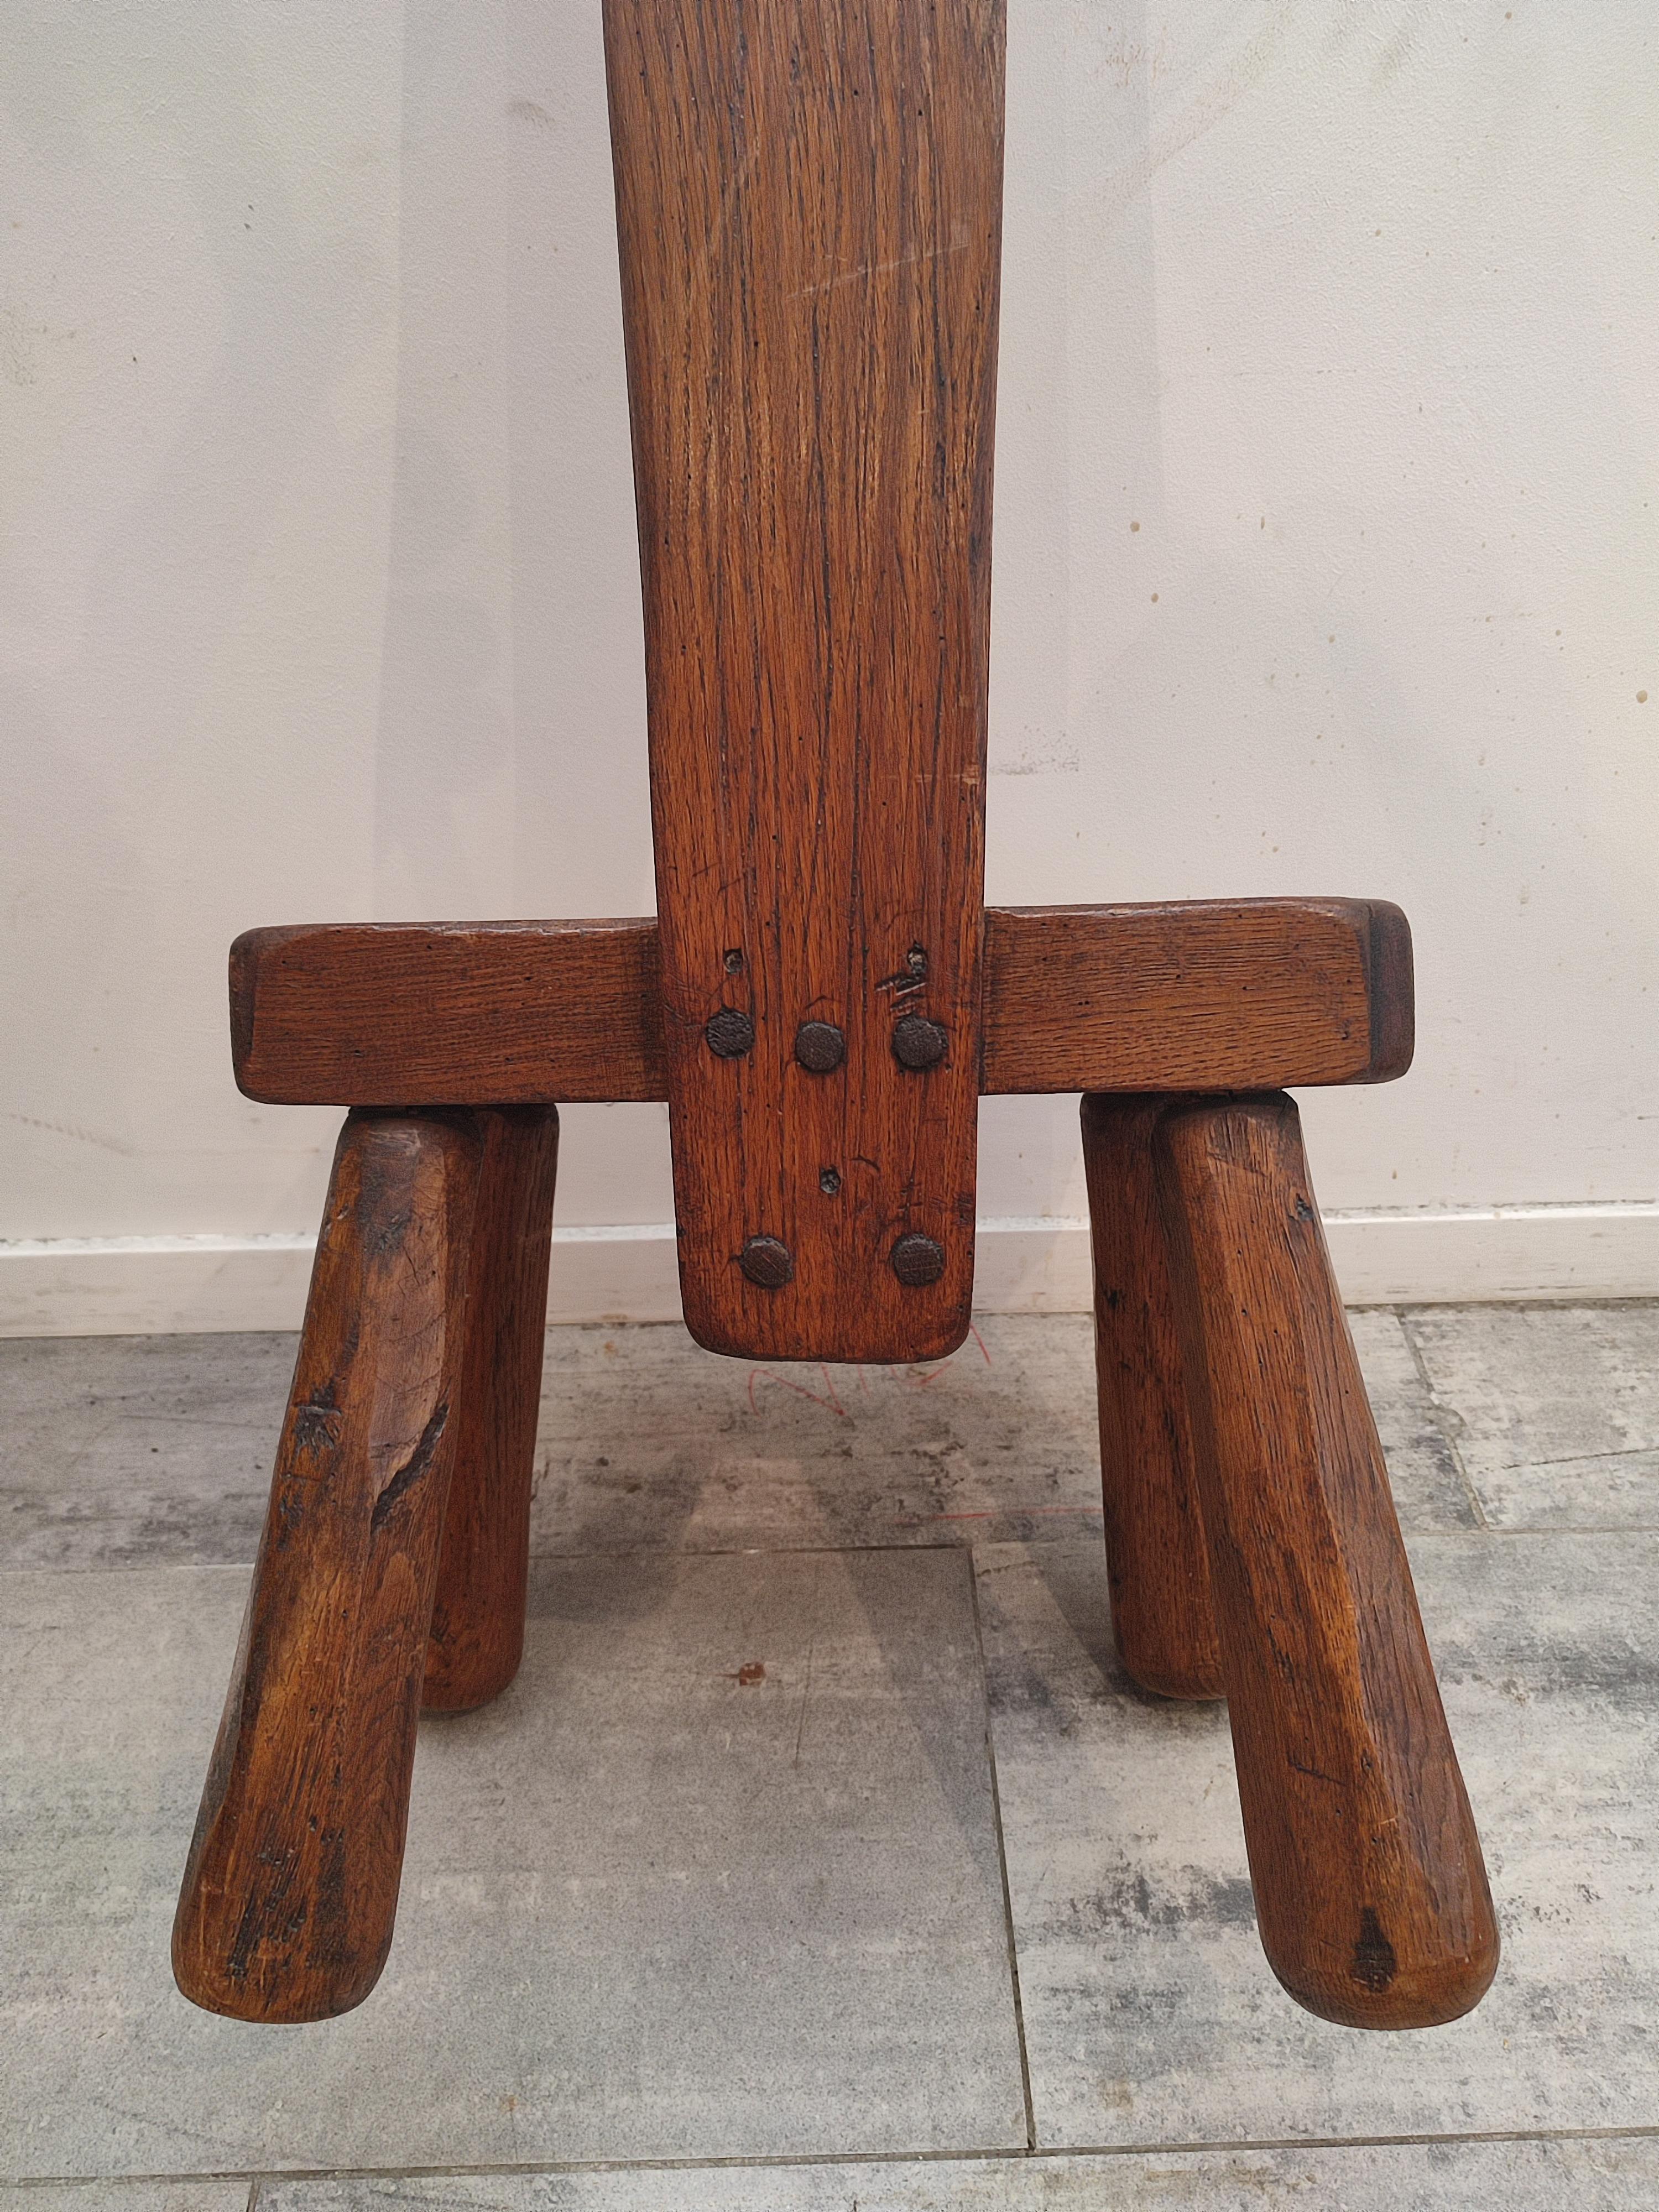 French Rough Brutalist Wooden Chair from France, 1950s For Sale